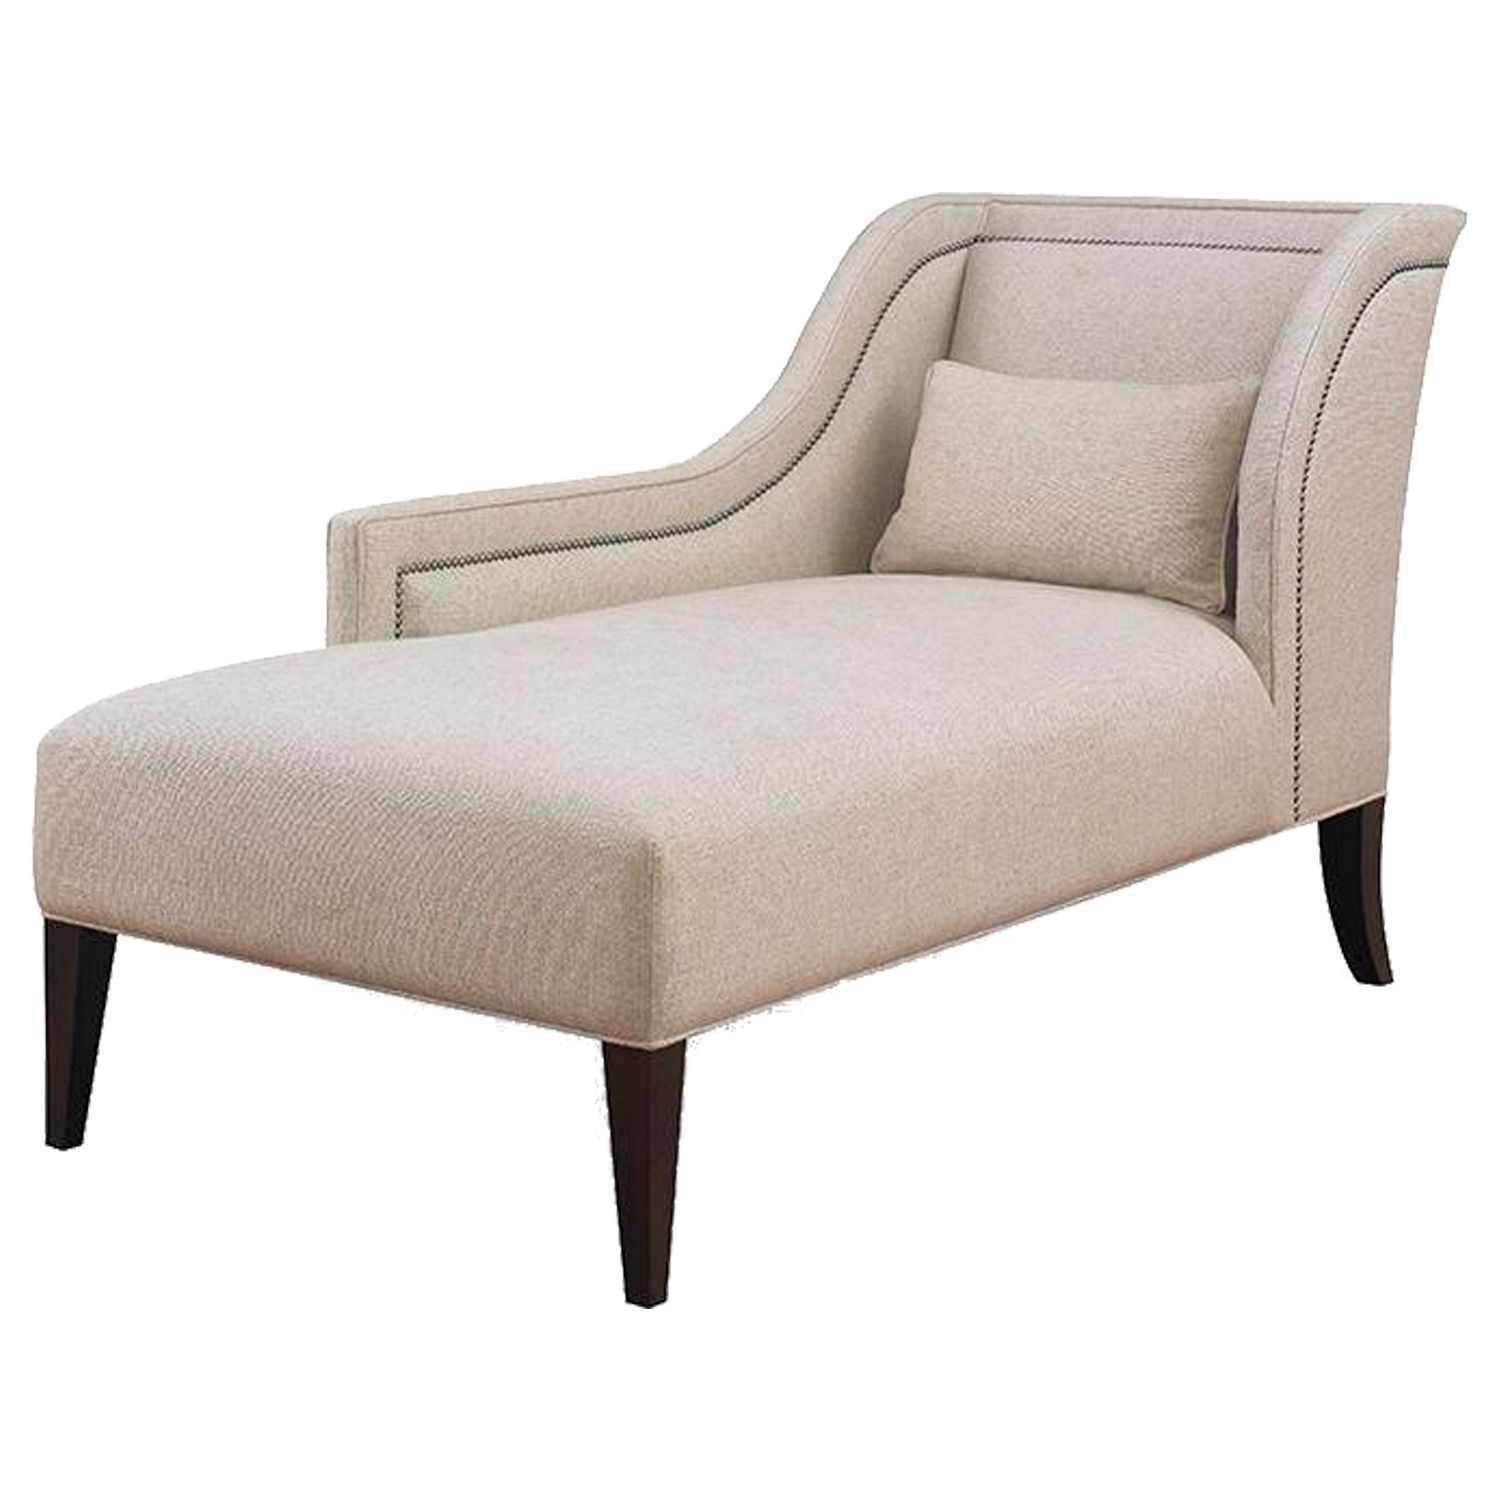 Modern Chaises In Famous Buy Pasadena One Arm Chaisekravet – Made To Order Designer (View 11 of 15)